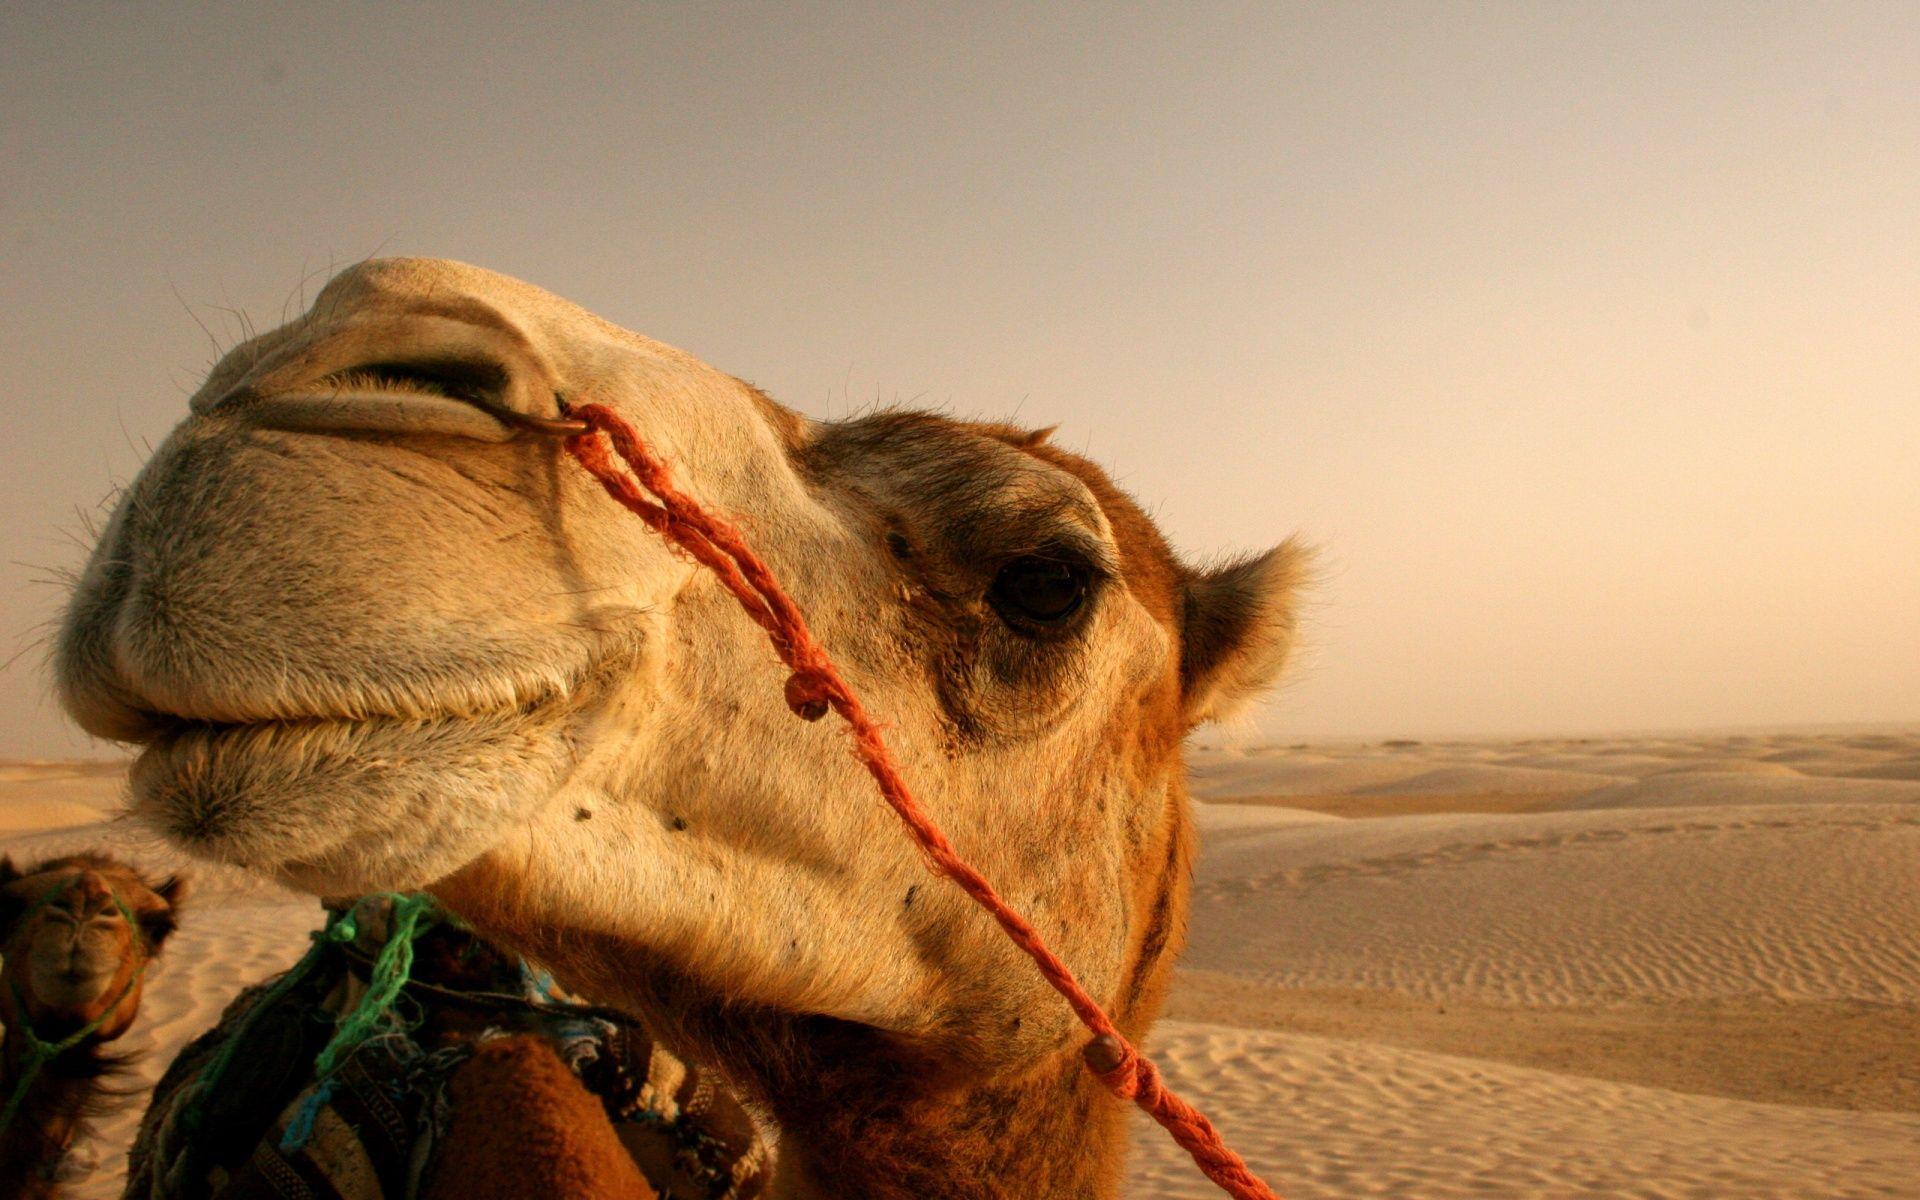 Camel Wallpaper HD Full HD Picture 1920×1200 Camel Picture